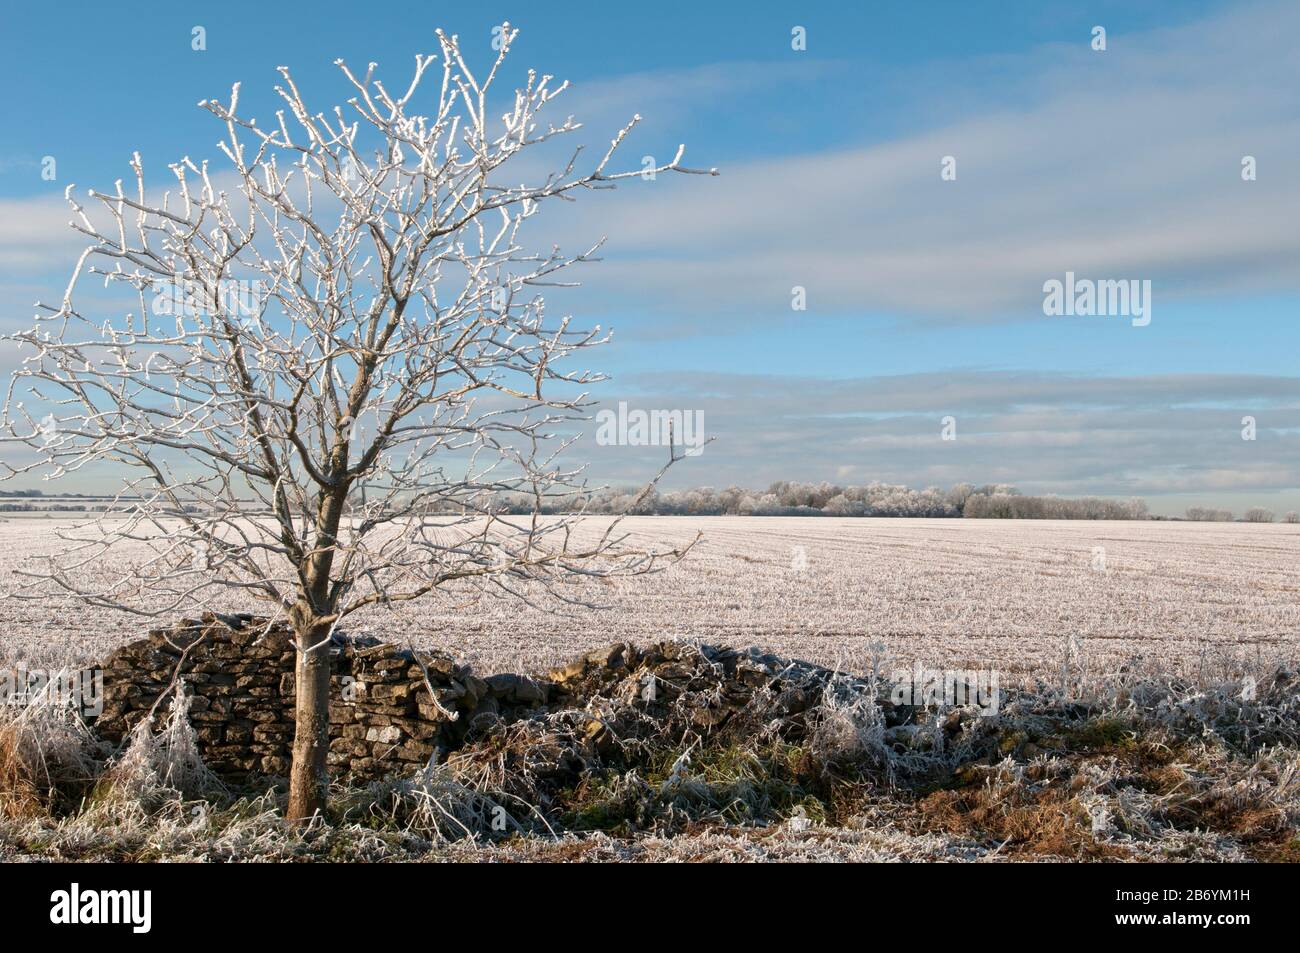 Hoar frost covering the landscape Stock Photo